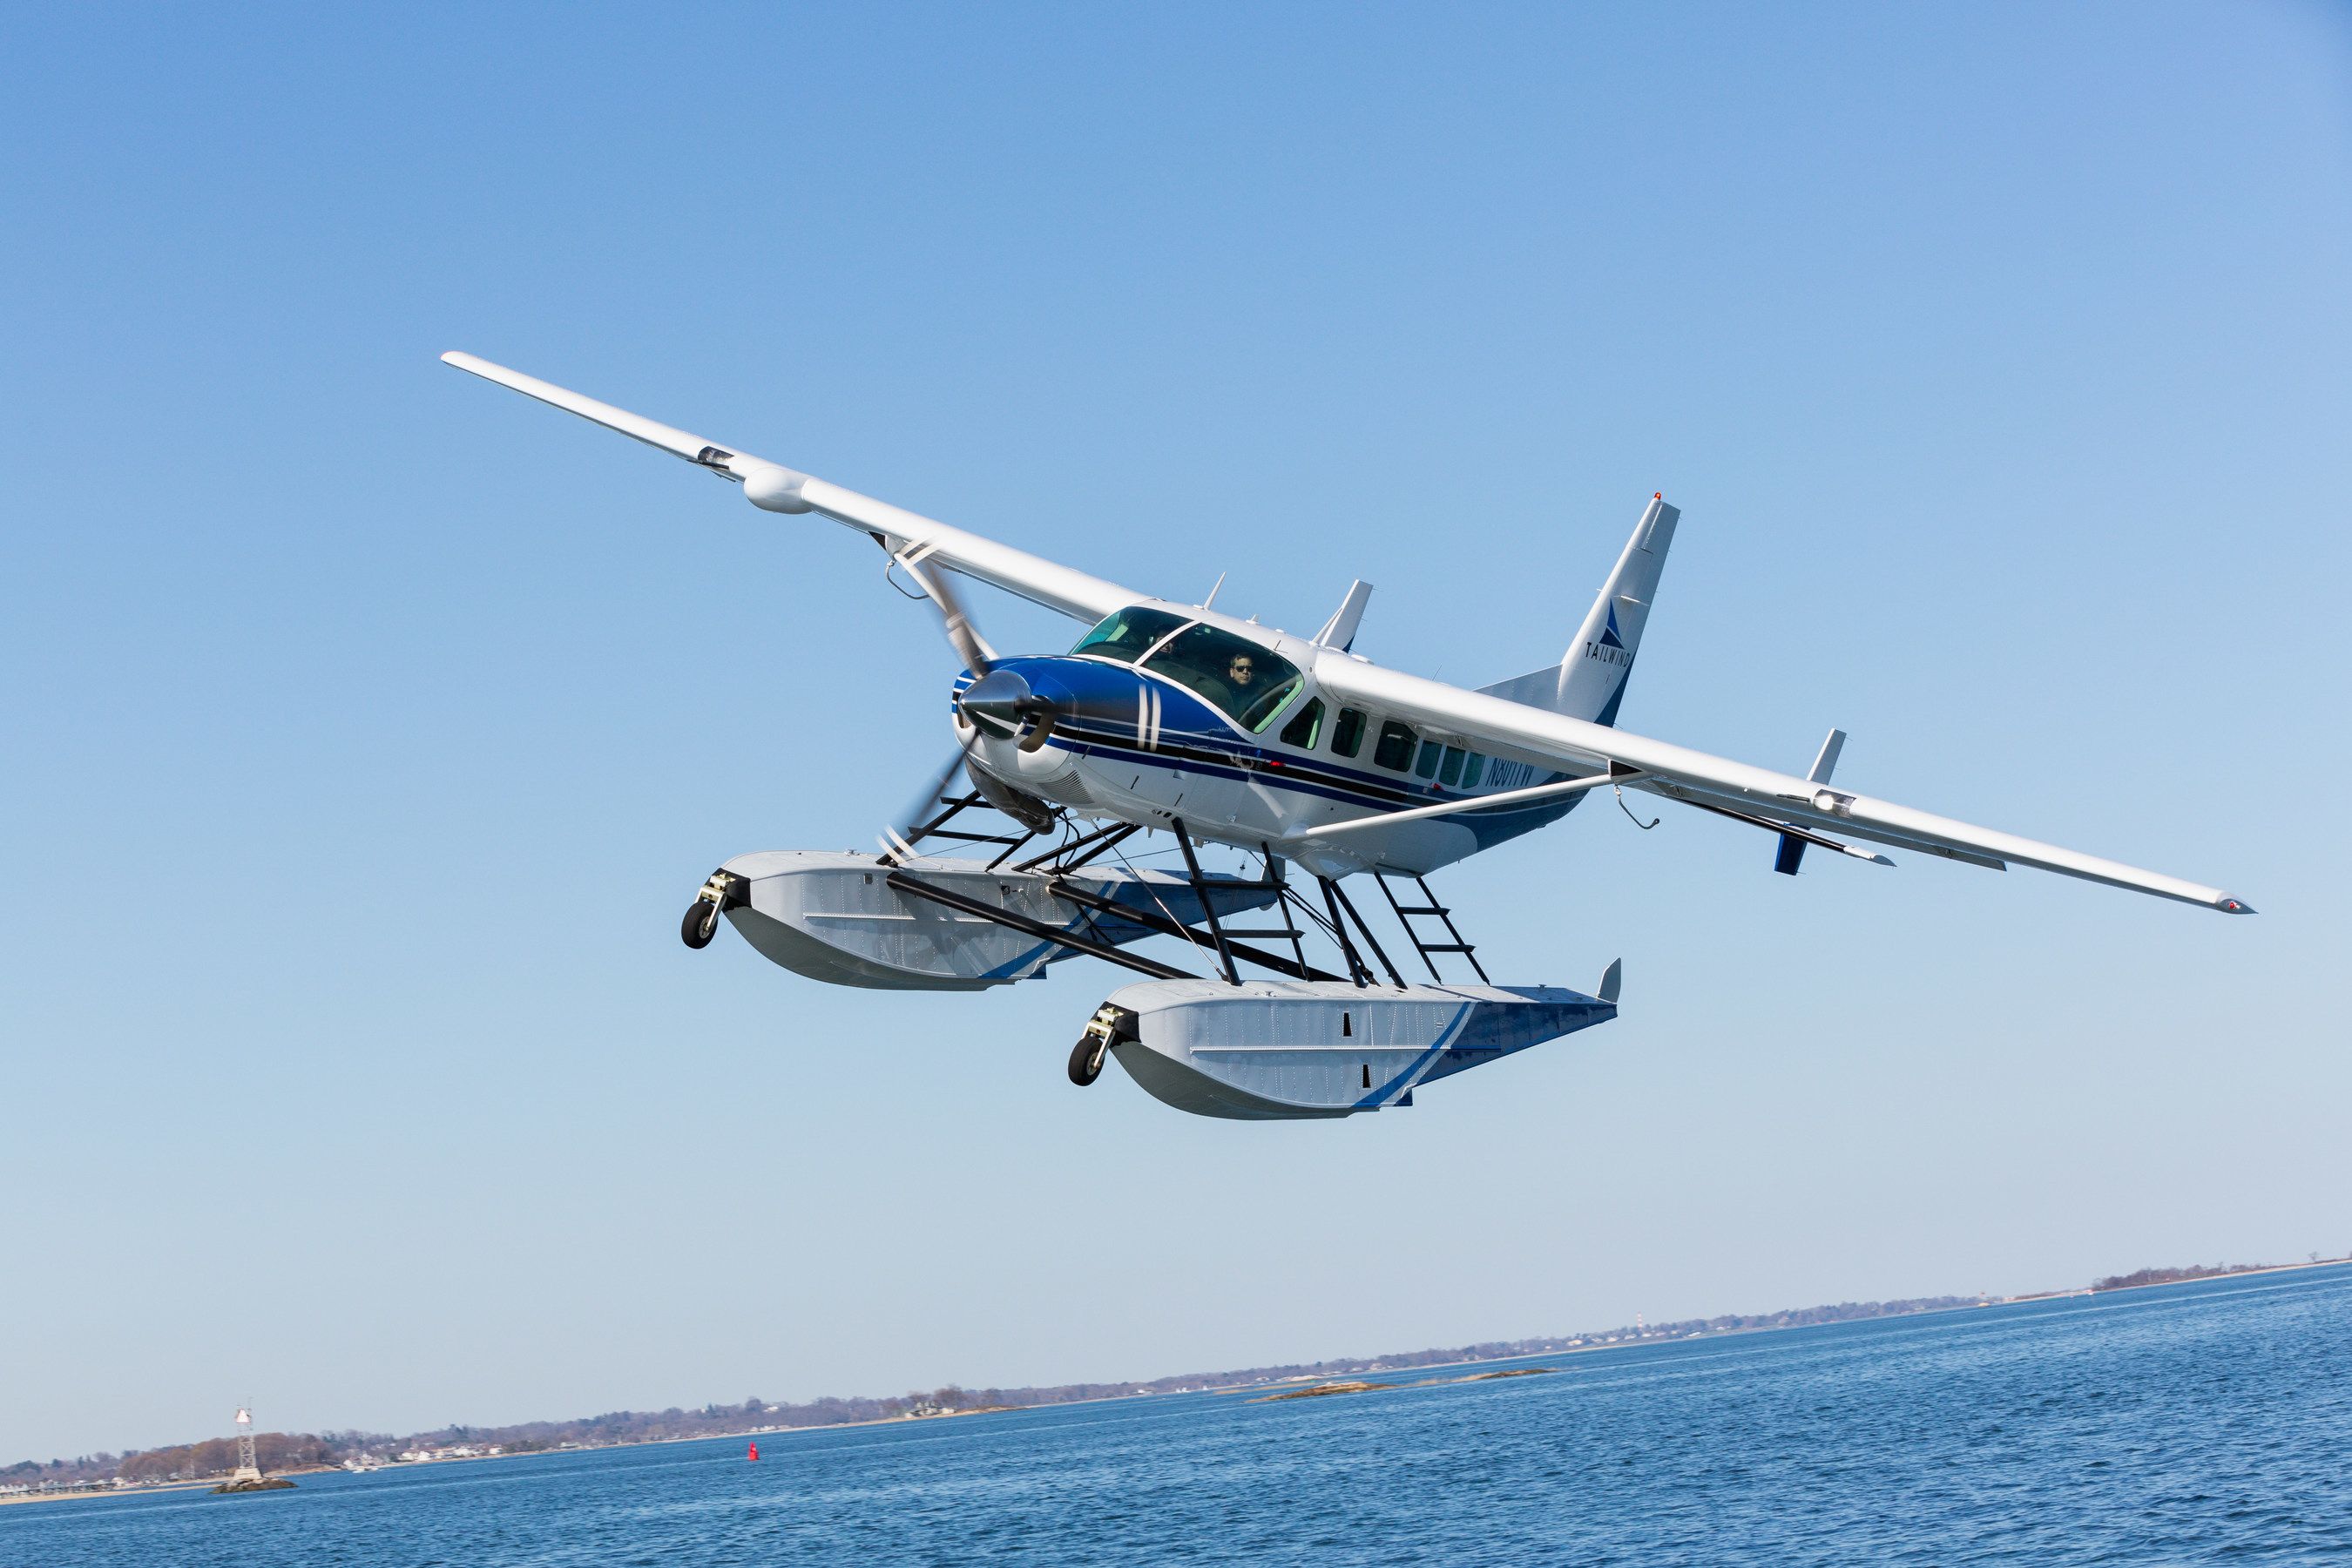 Tailwind Air Starts Seaplane Flights From DC Area To New York